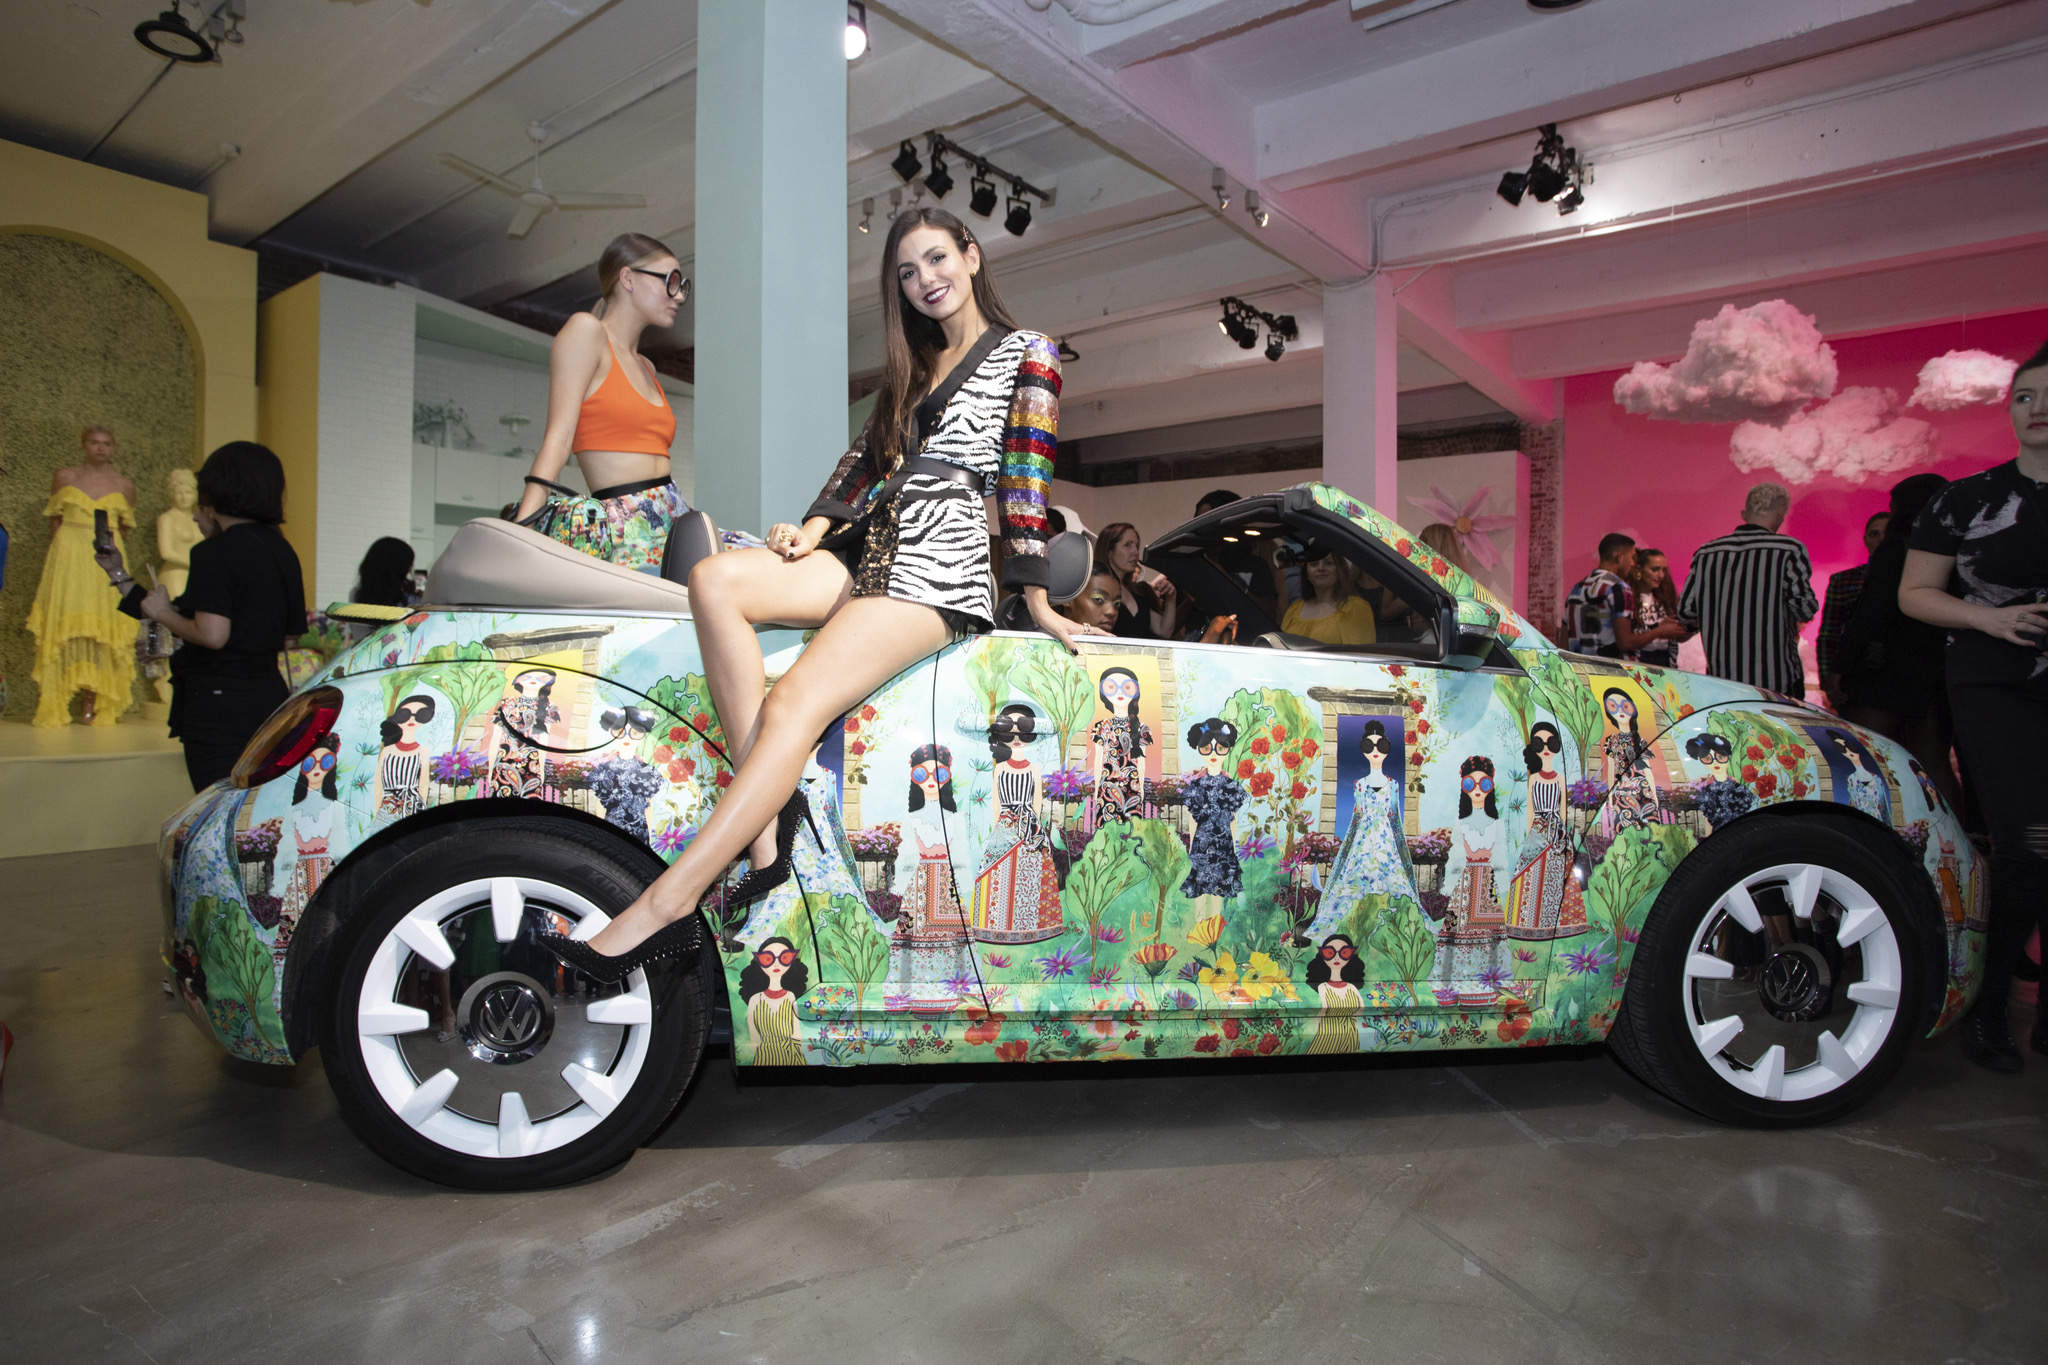 New York fashion week, VW Beetle featured on the fashion catwalk, ClassicCars.com Journal